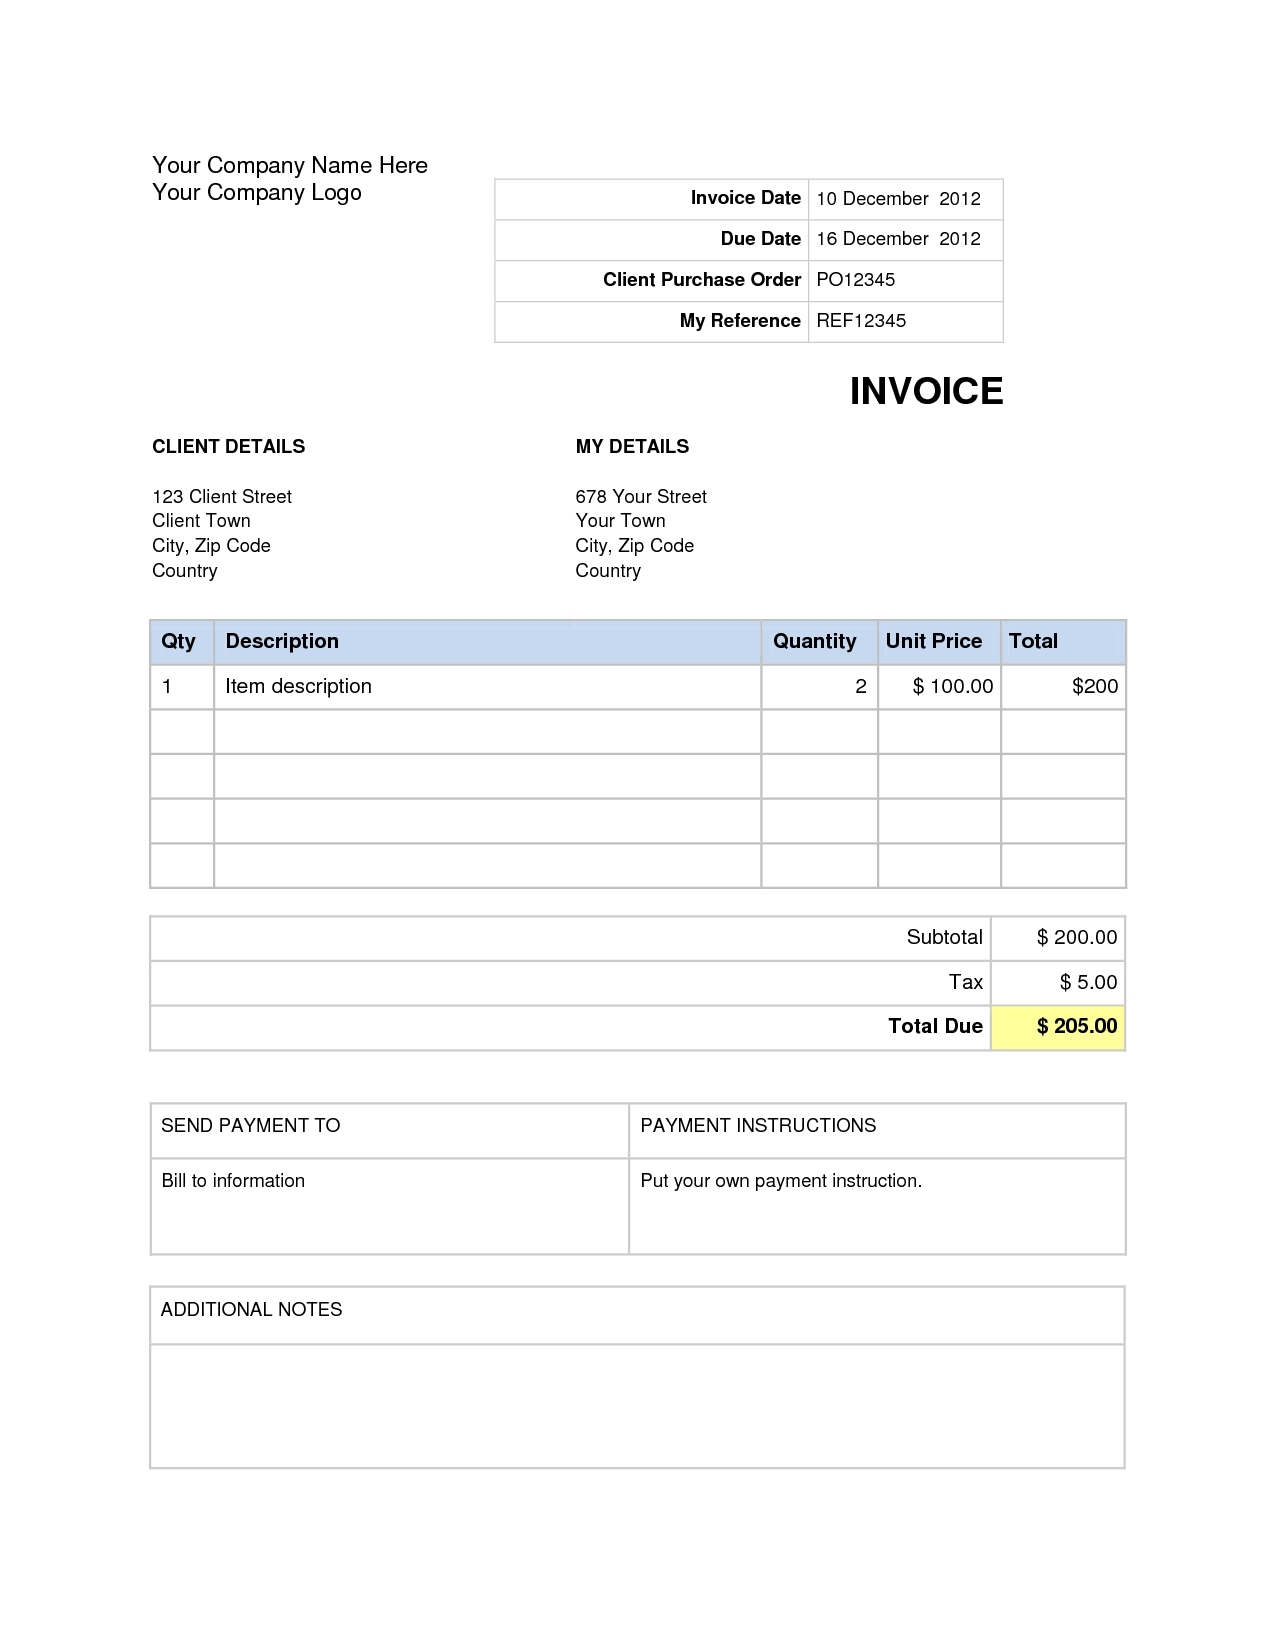 sample invoice format in word invoice template ideas sample invoice in word format